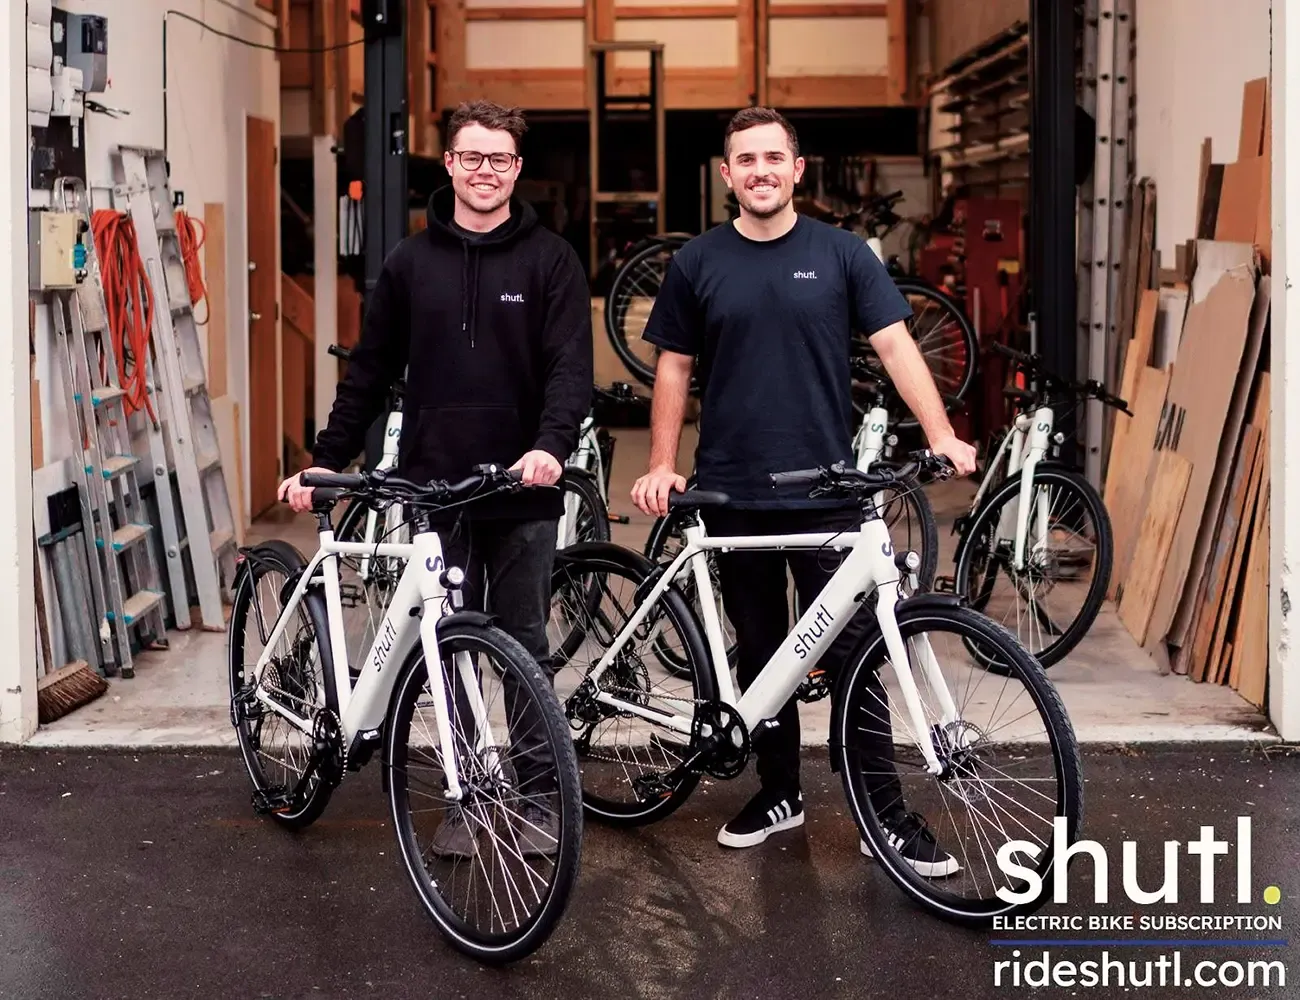 Co-founders of Shutl Connor Read and Aidan Smith